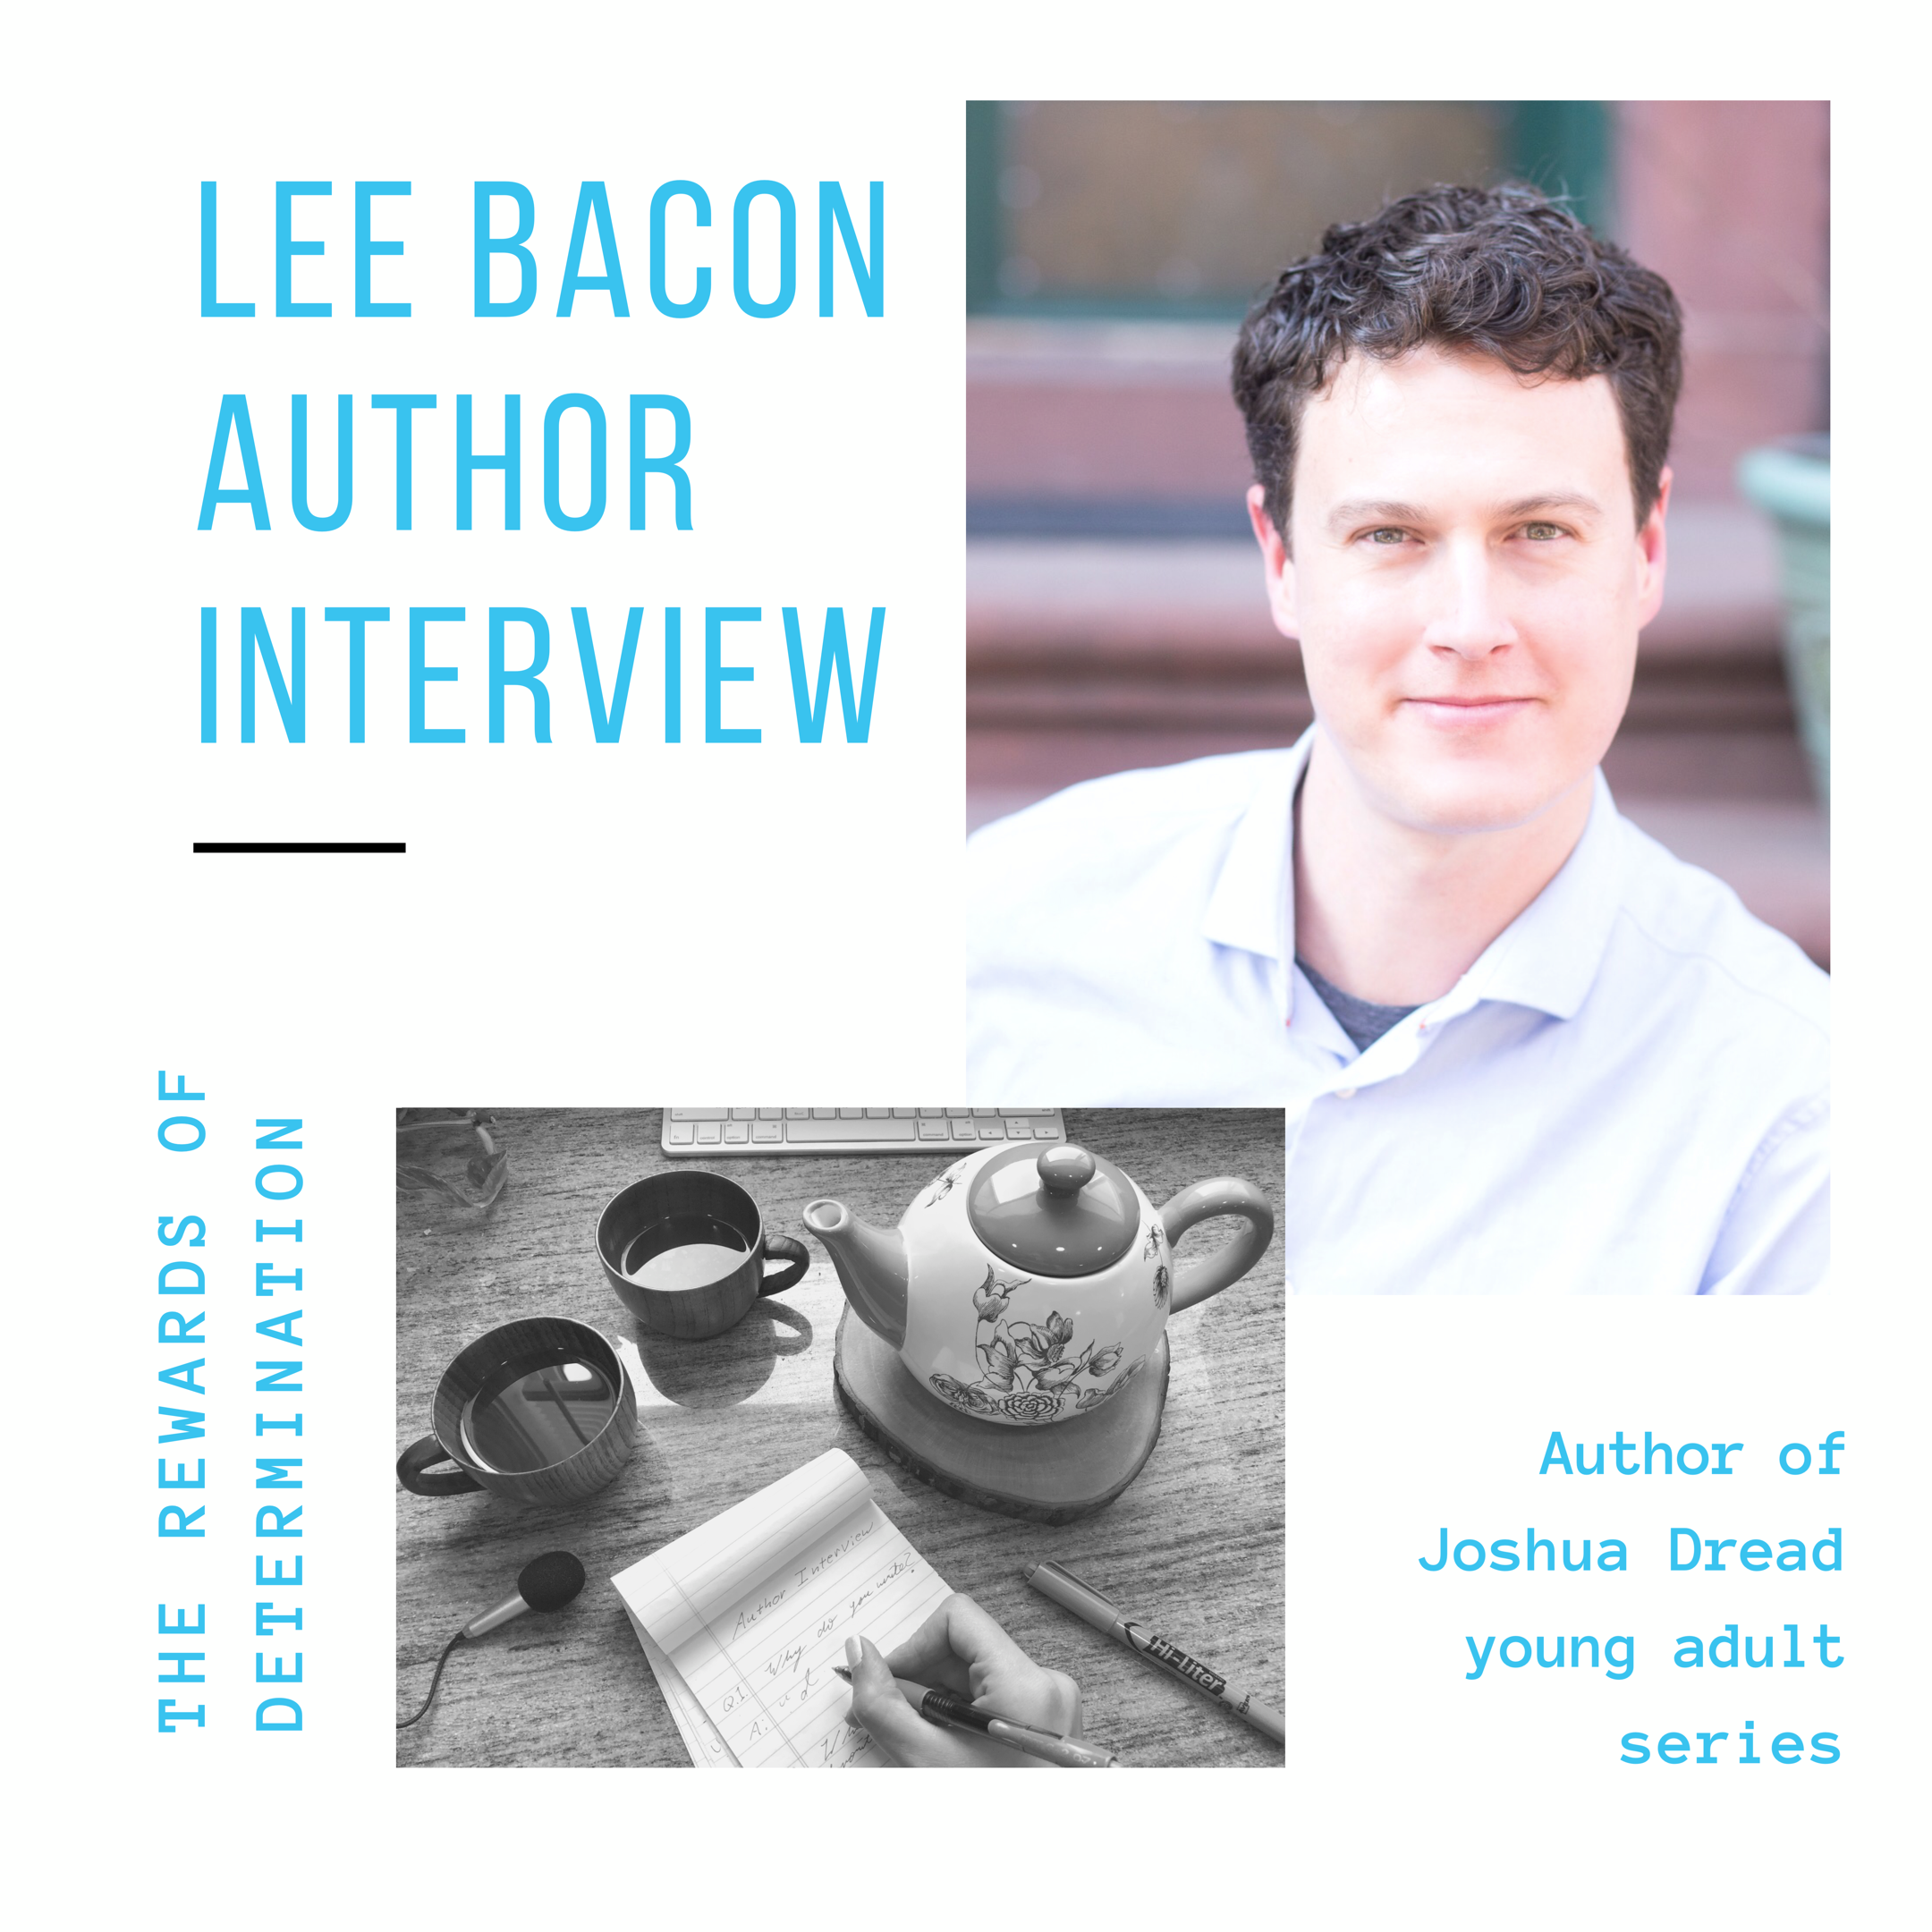 Author interview with Lee Bacon, author of Joshua Dread YA book series